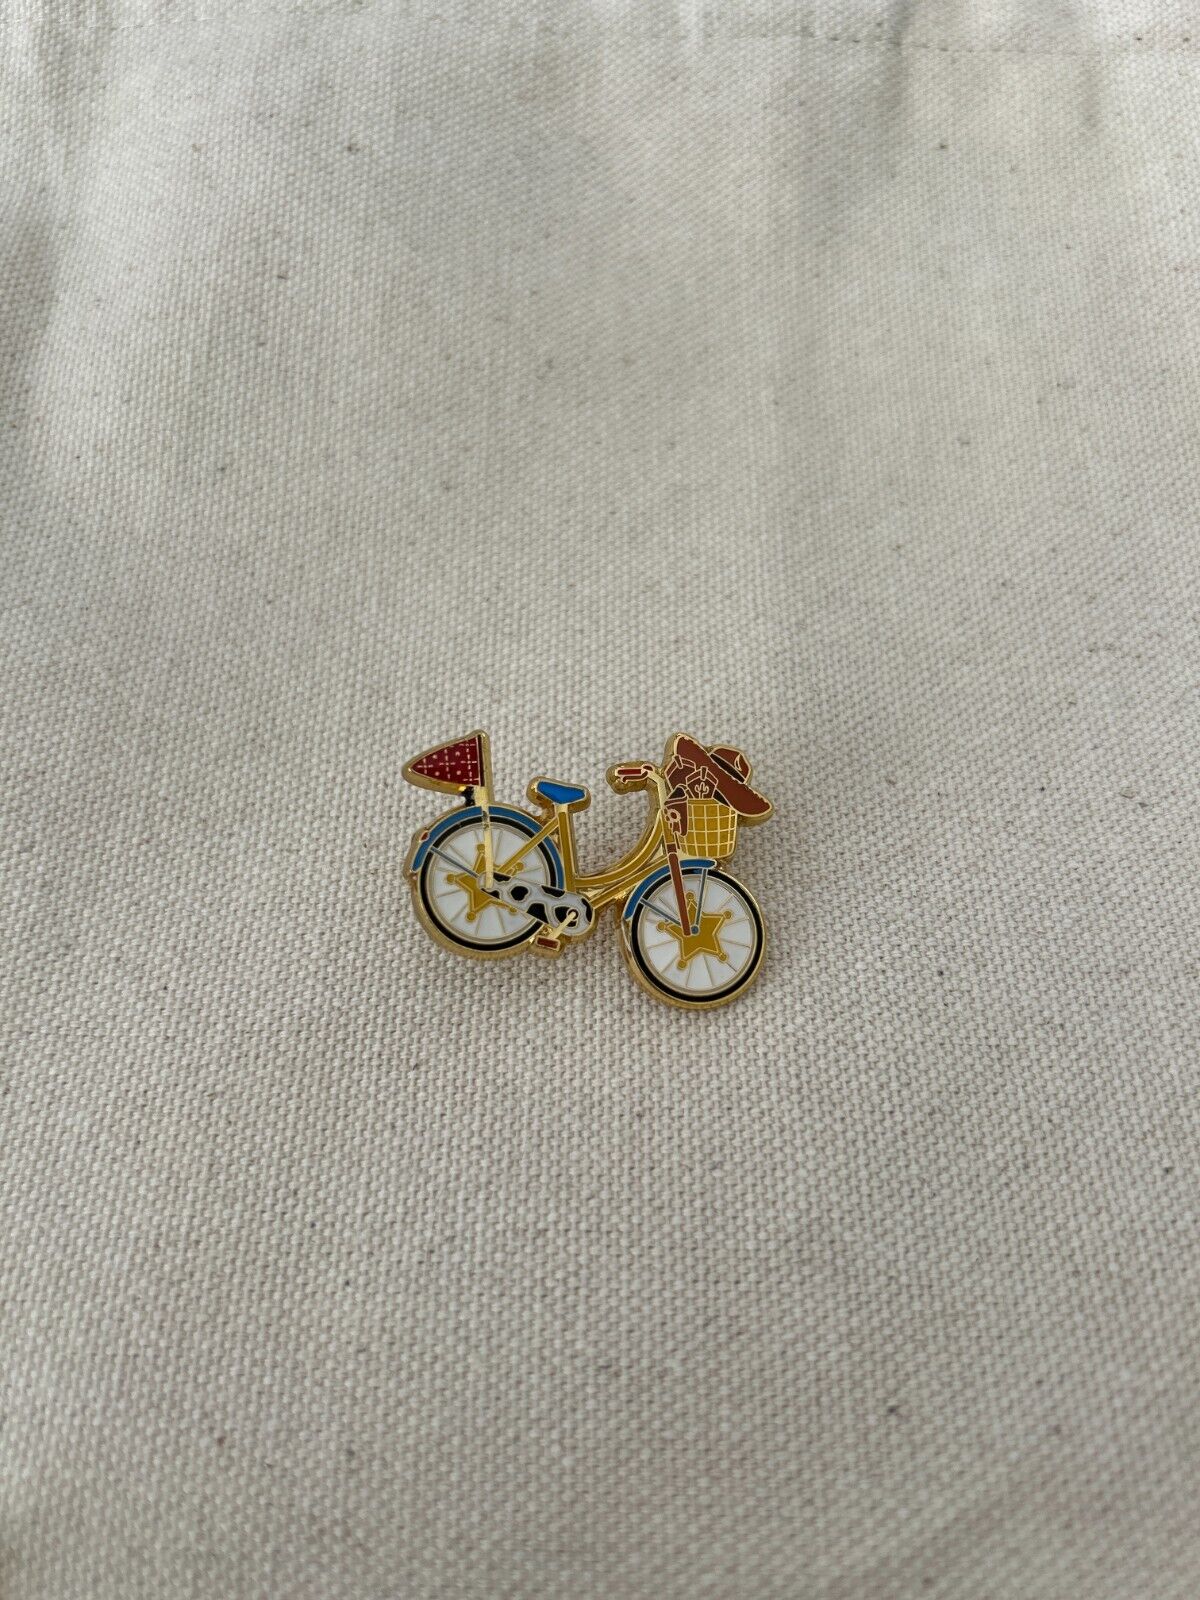 NWOT Toy Story Loungefly Disney Pixar Character Bicycle Blind Box Pin 